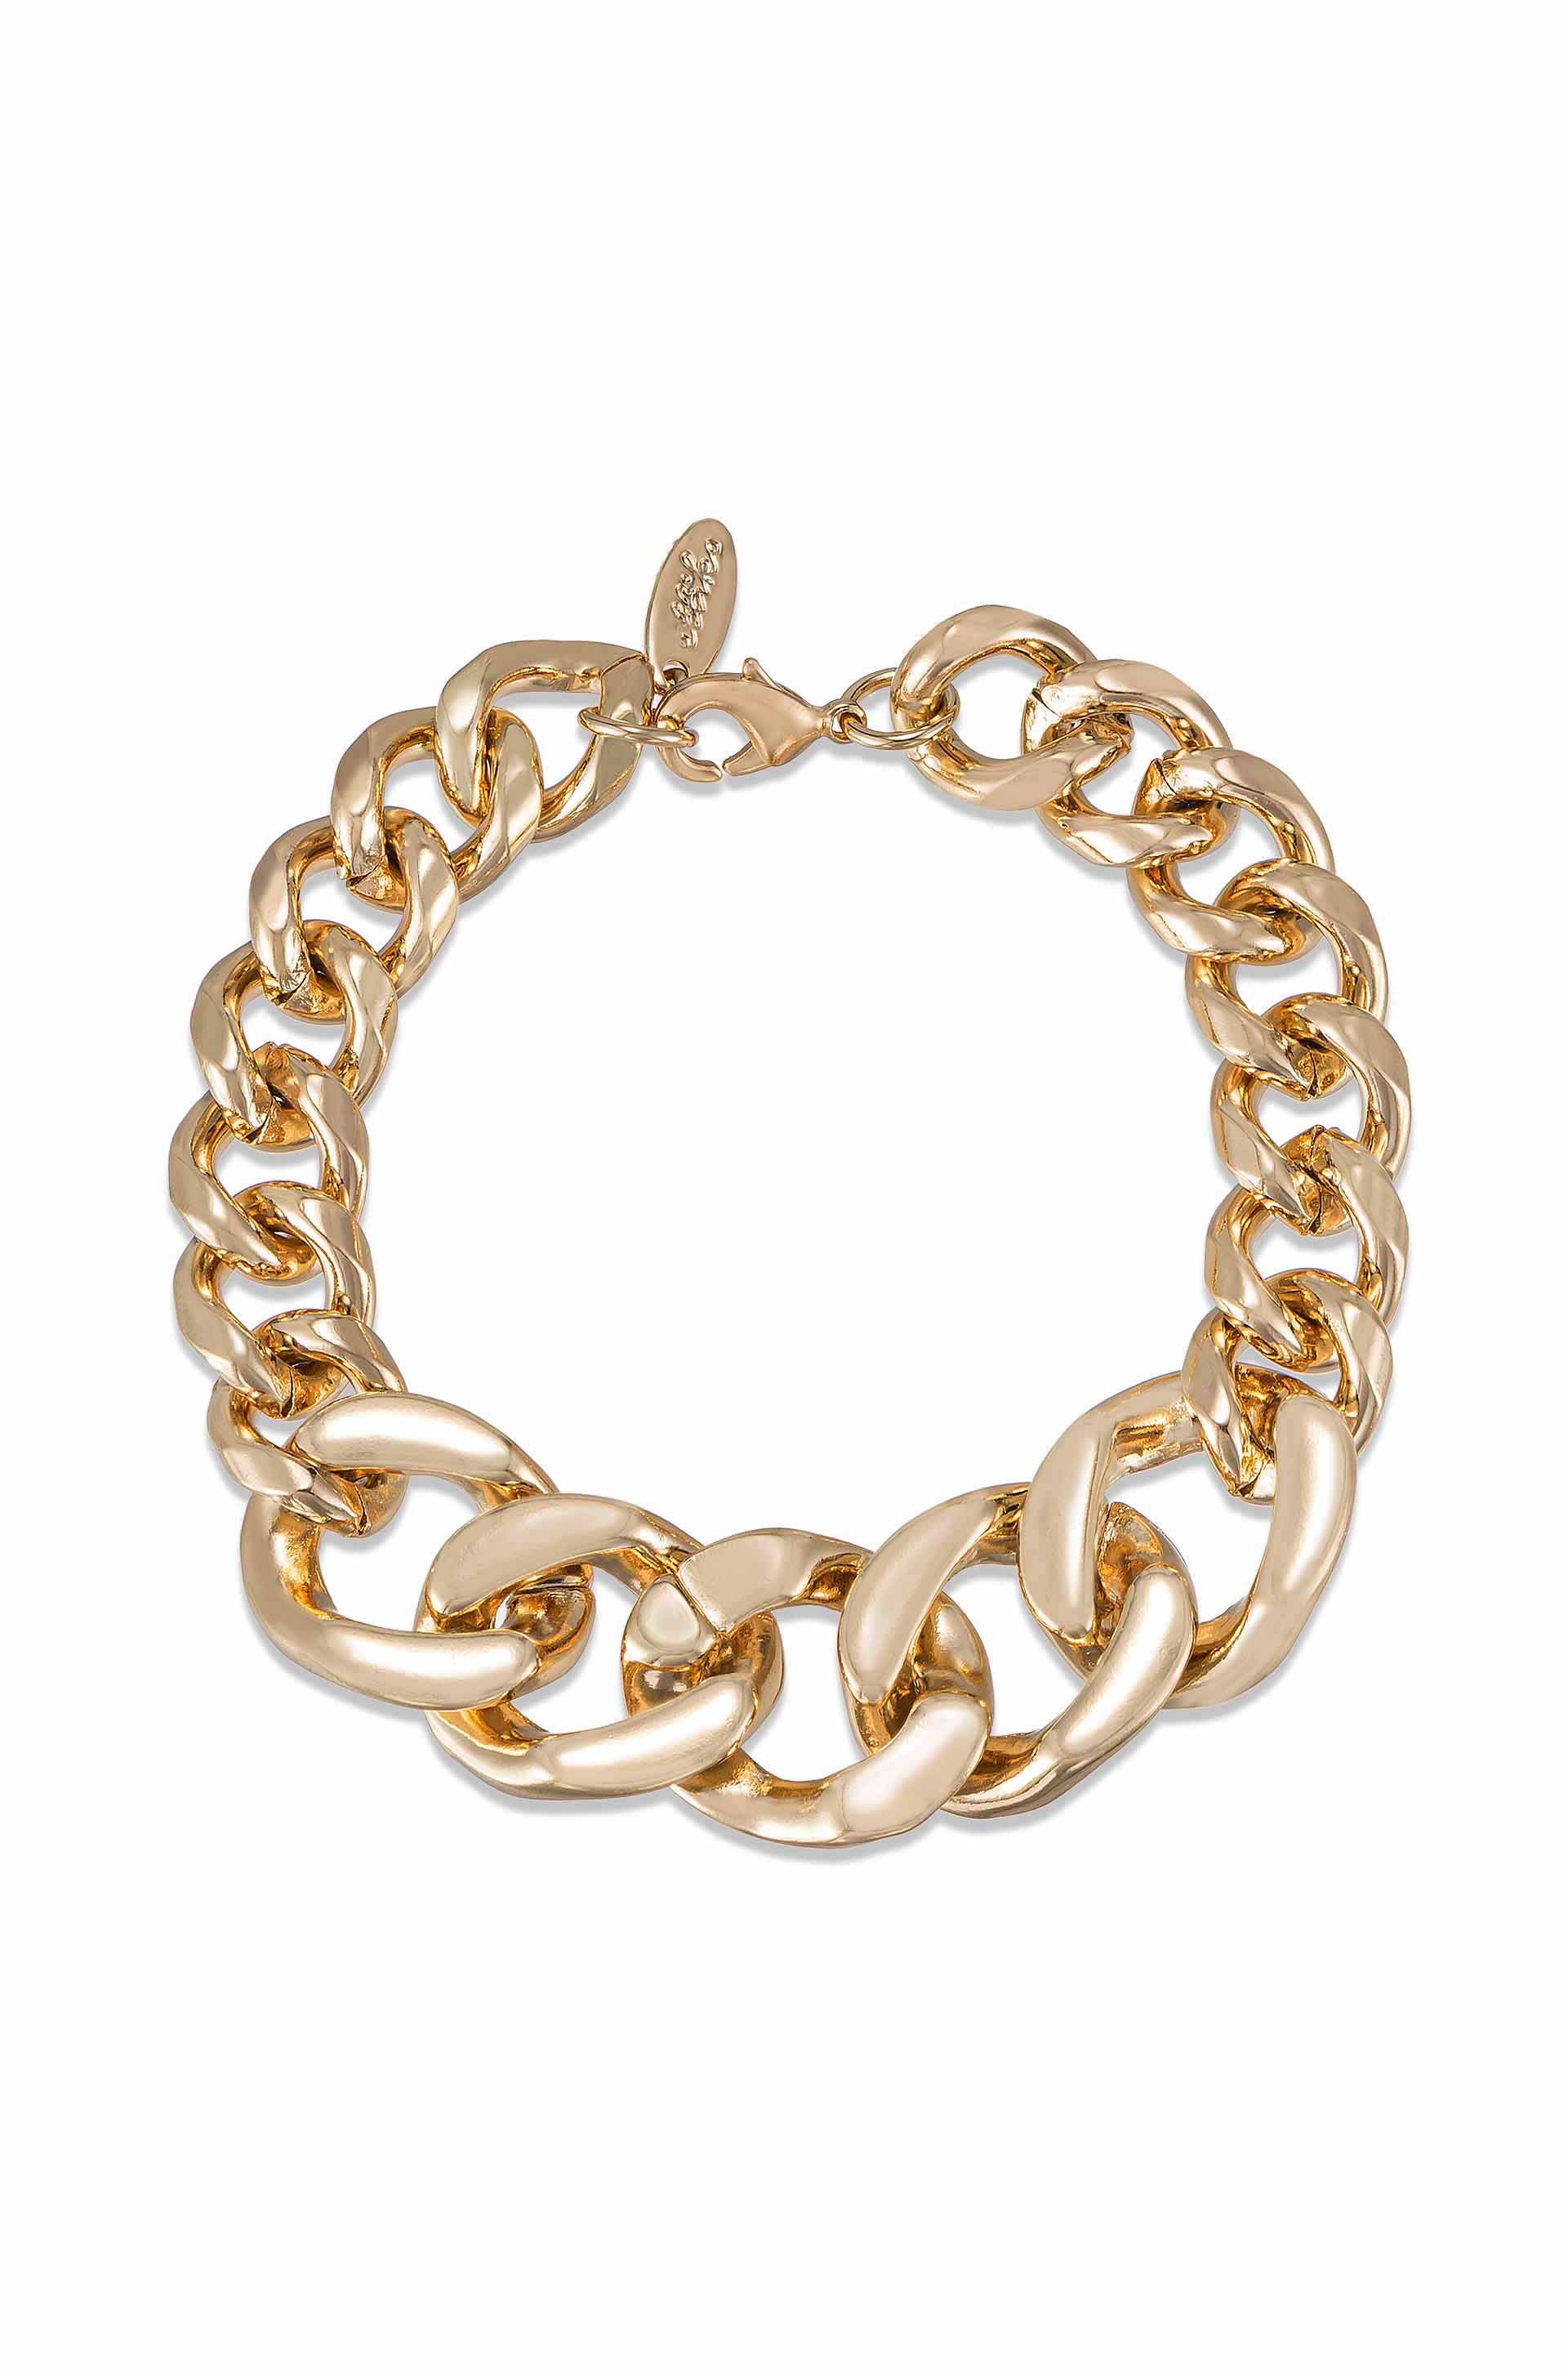 Chain Link Bracelet in 9ct Yellow Gold